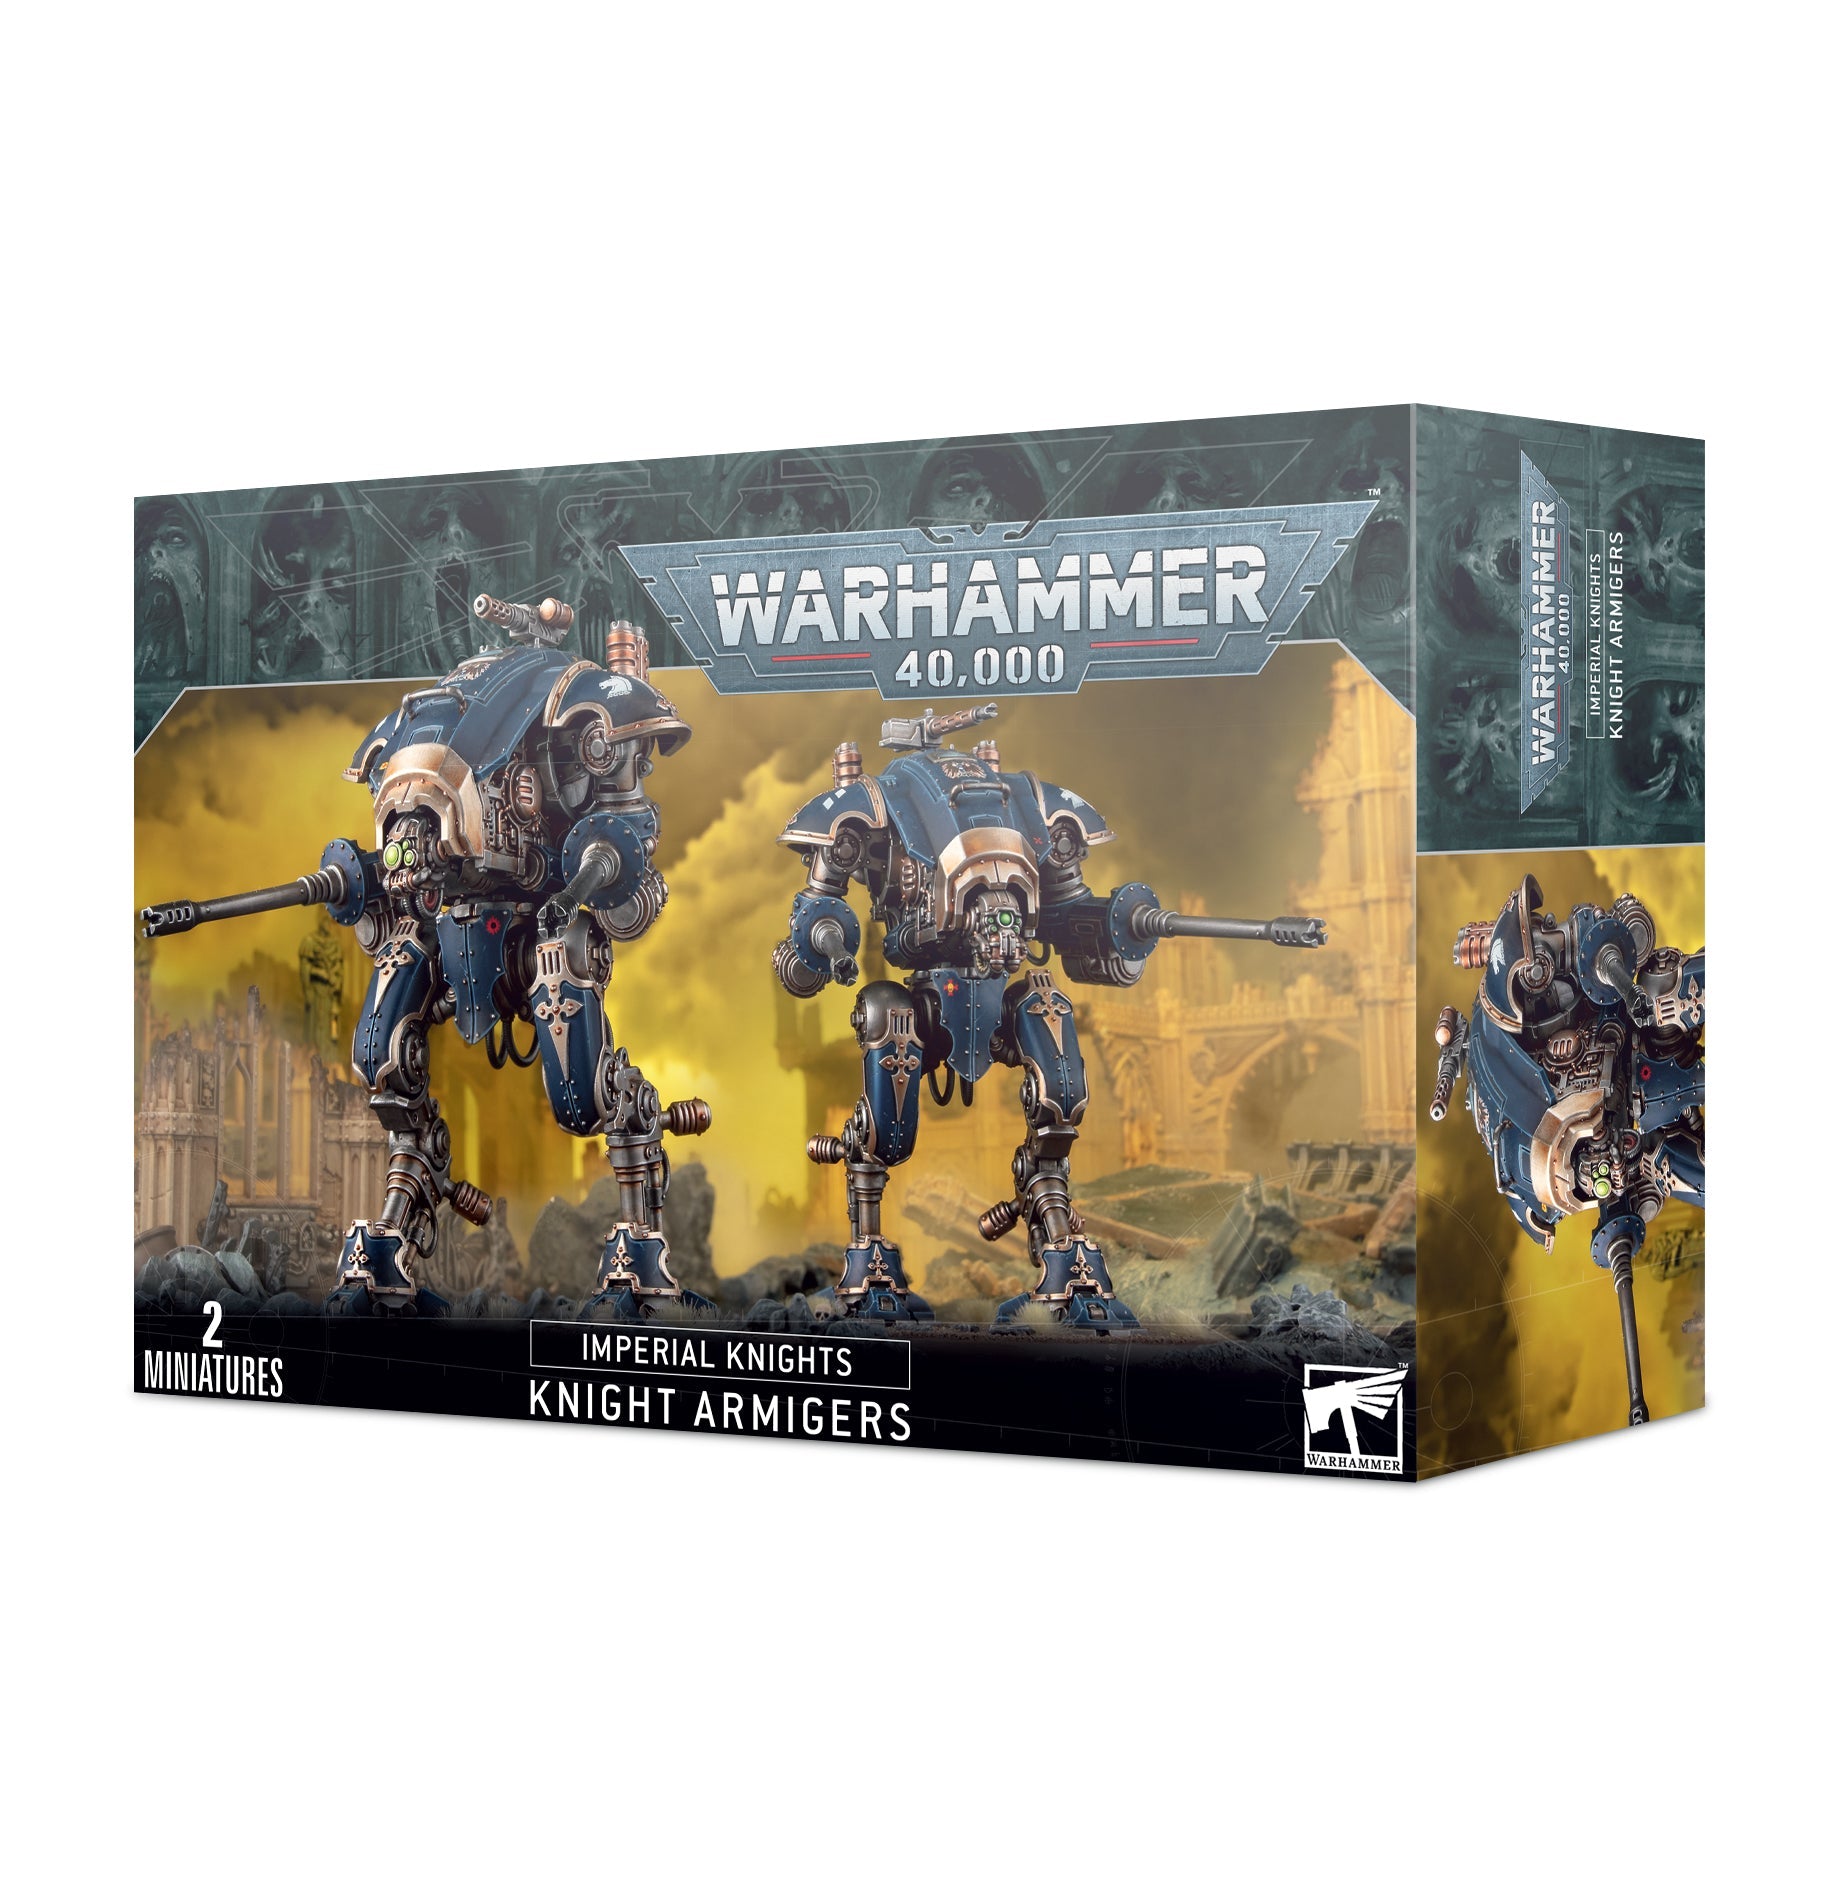 WH40K IMPERIAL KNIGHTS: KNIGHT ARMIGERS | Impulse Games and Hobbies